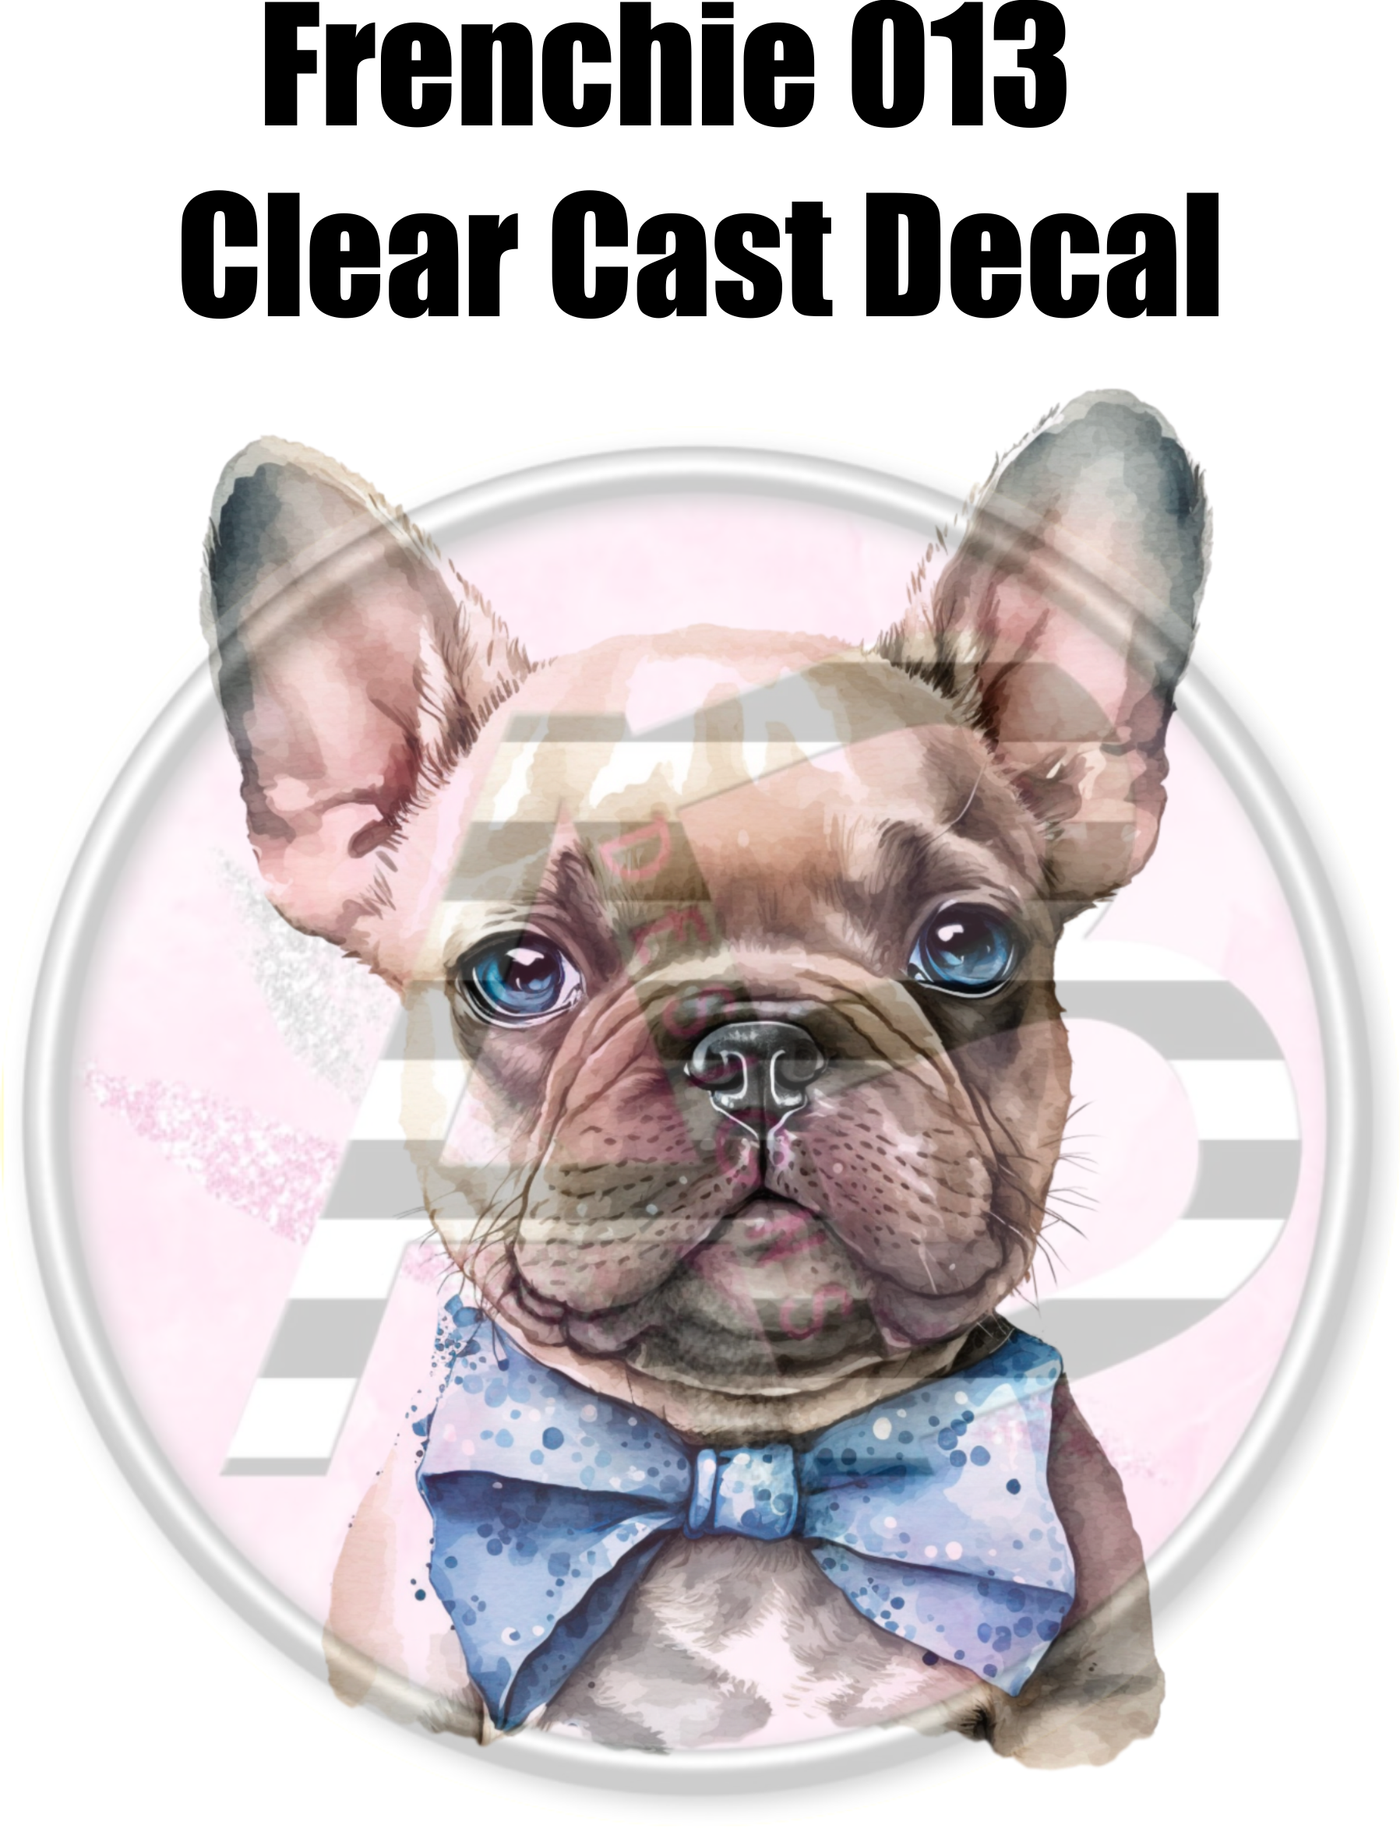 Frenchie 013 - Clear Cast Decal